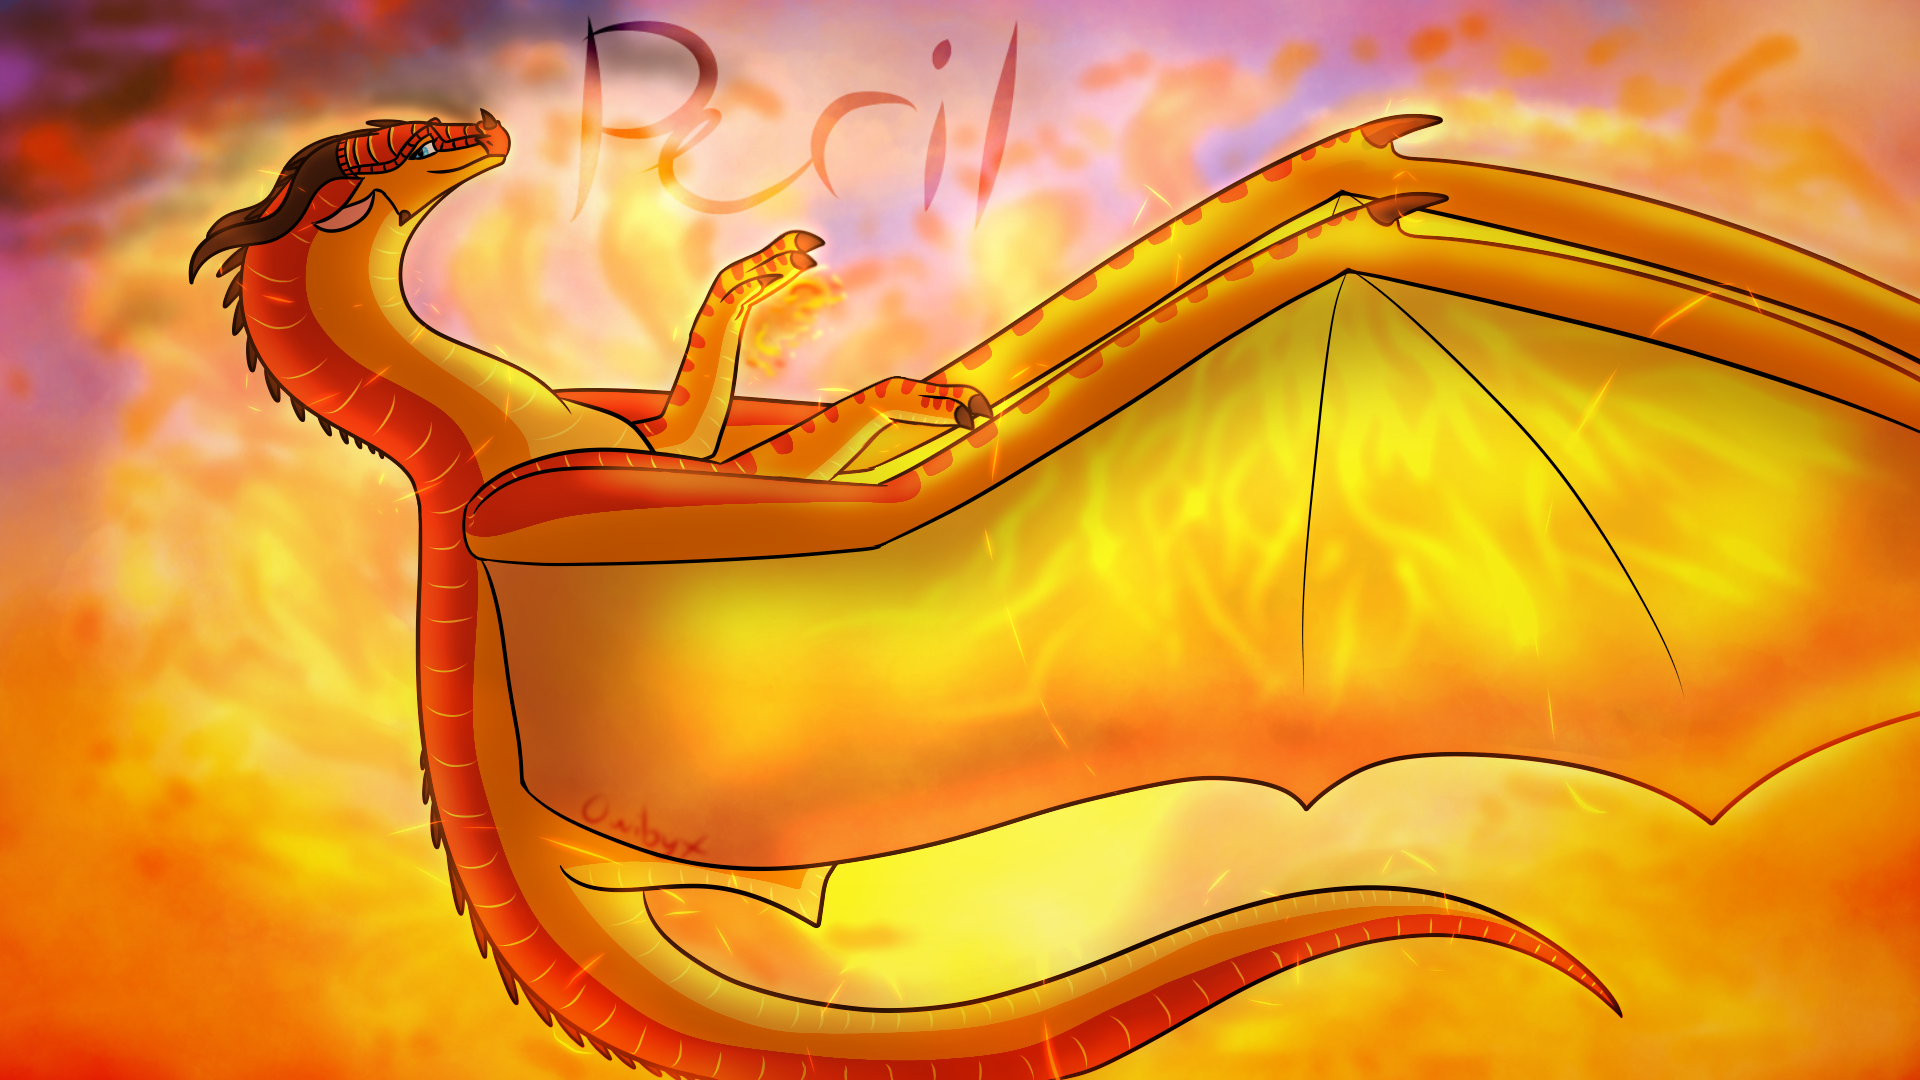 1920X1080 Peril Wallpaper Wings of Fire by Owibyx on DeviantArt. 